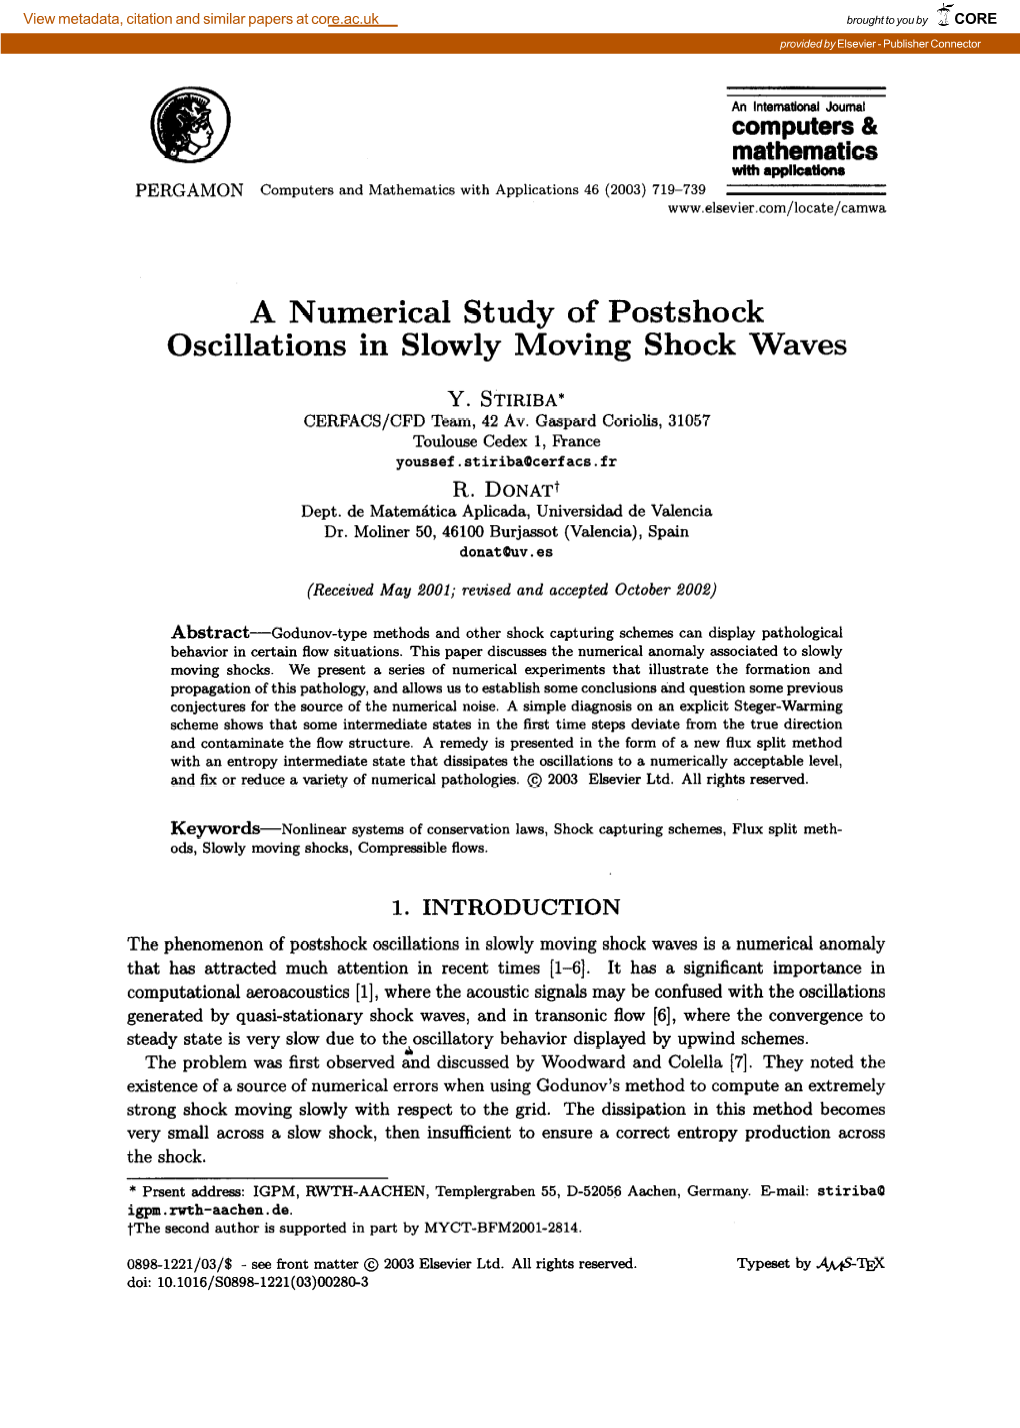 A Numerical Study of Postshock Oscillations in Slowly Moving Shock Waves